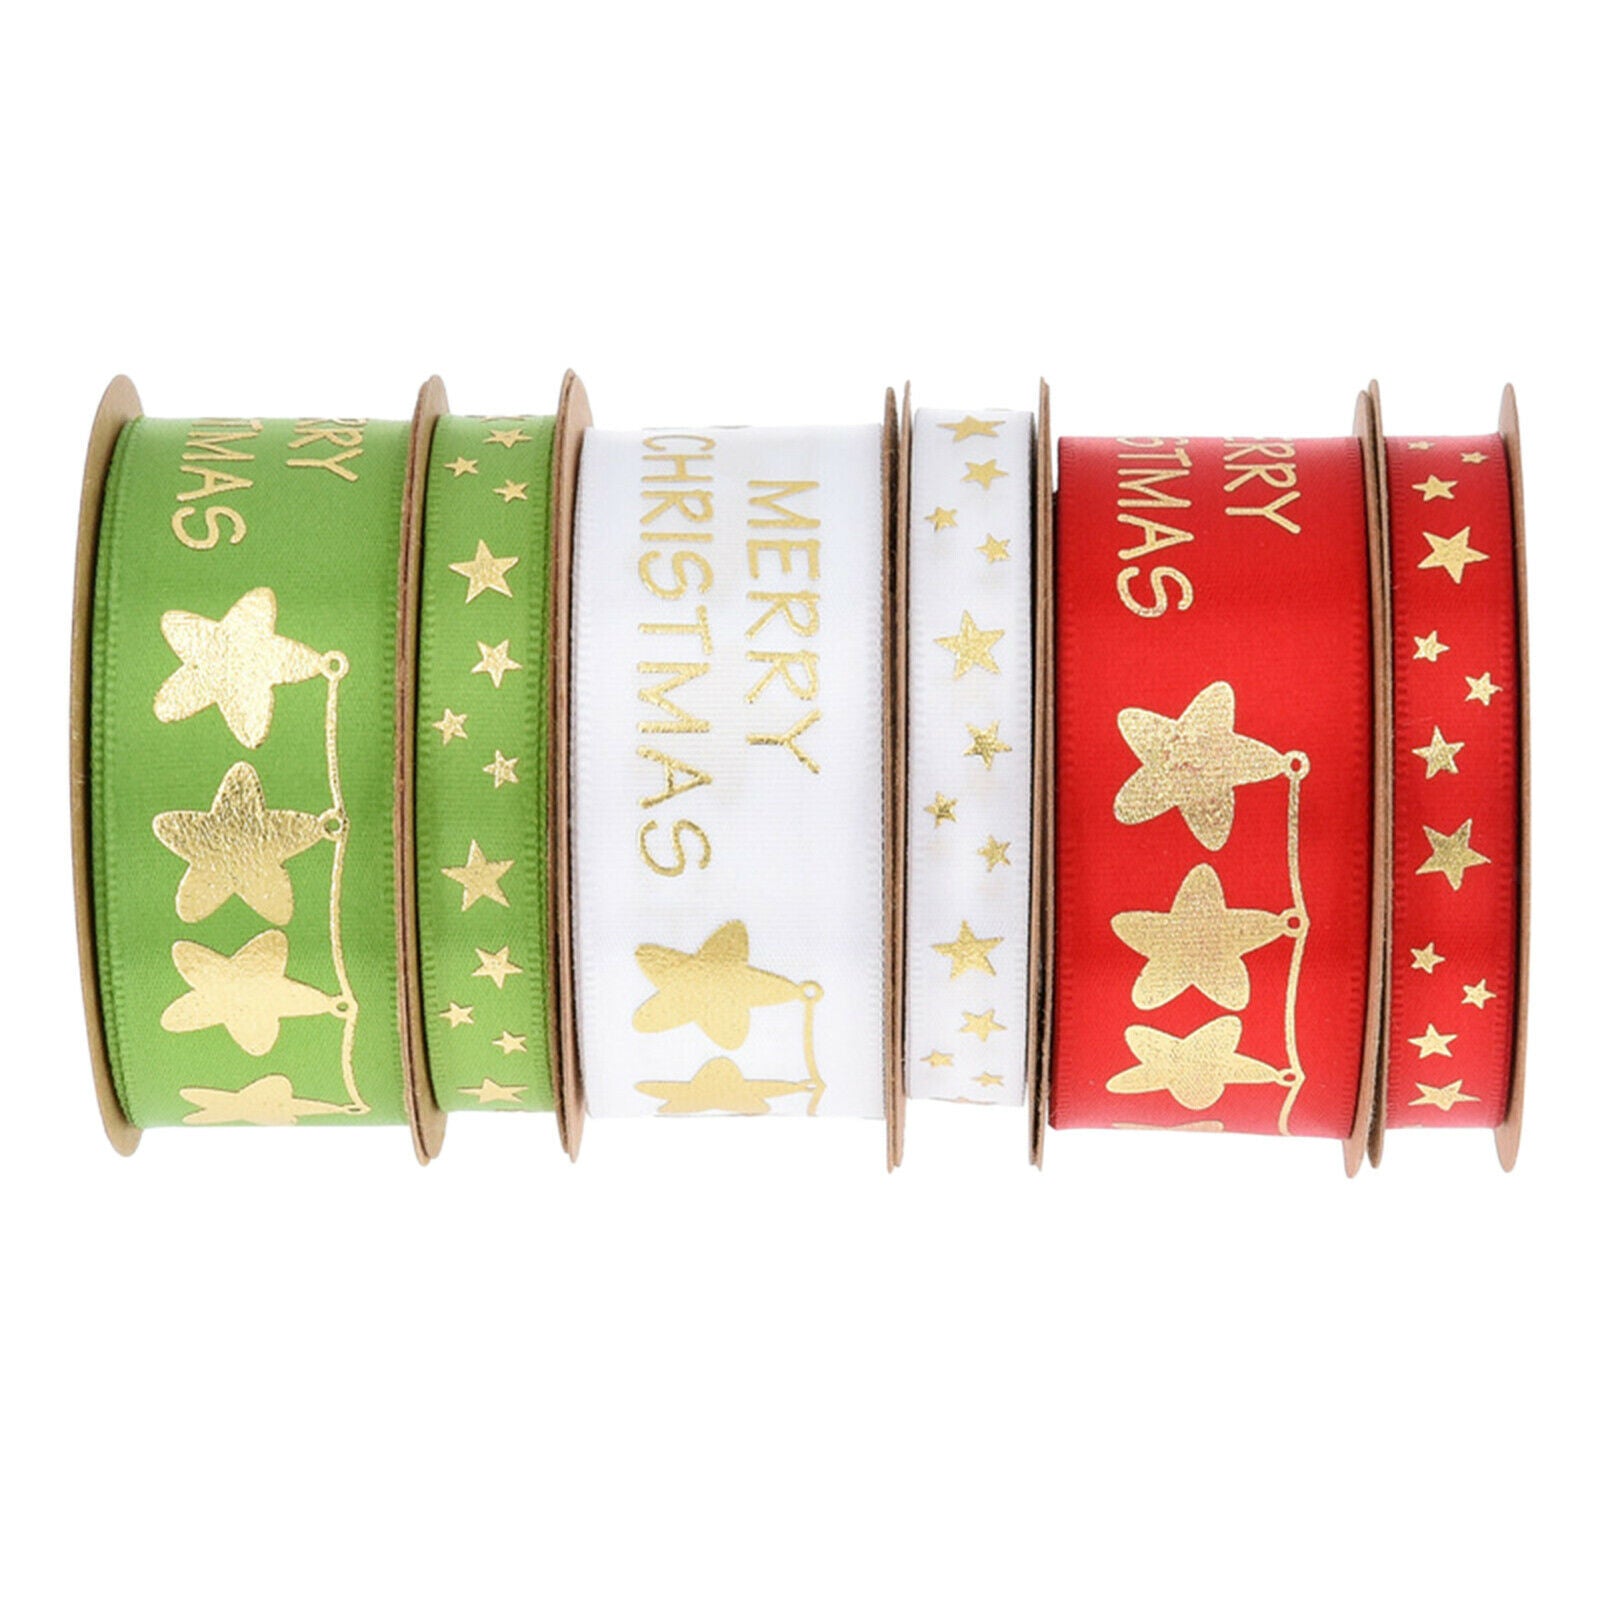 Merry Christmas Ribbon Printed Ribbons for Gift Wrapping DIY Decoration